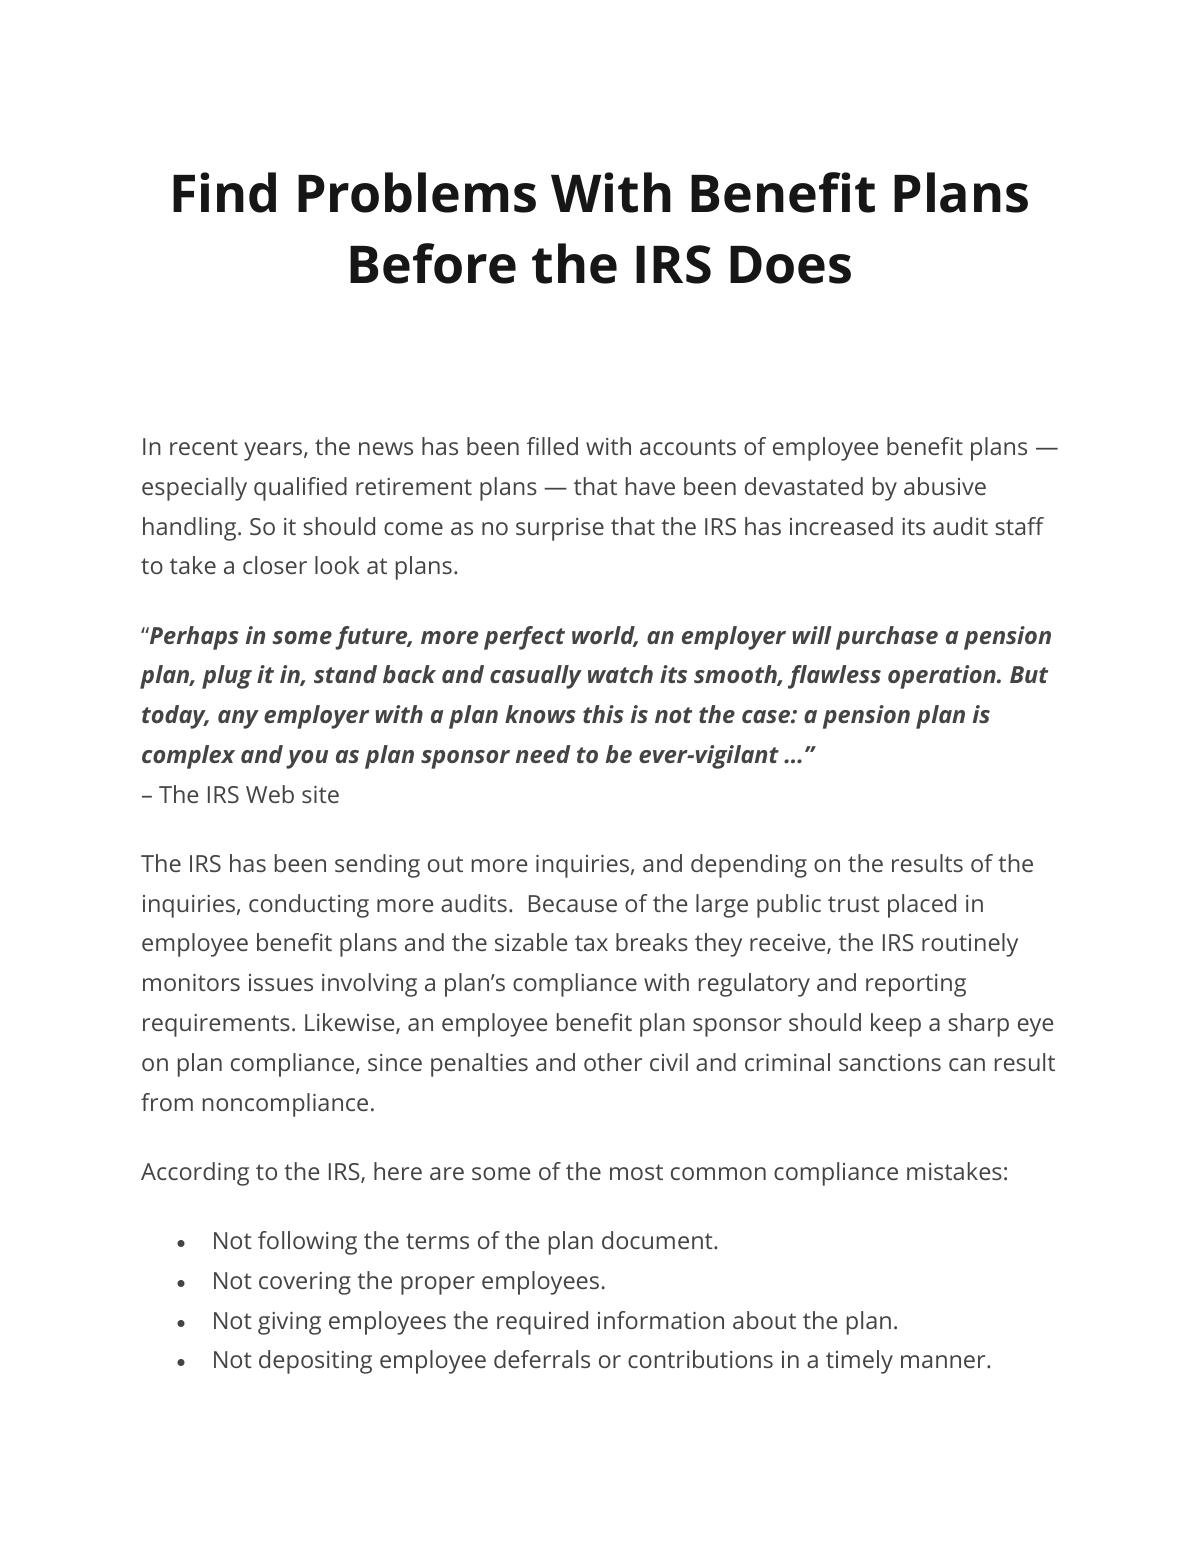 Find Problems With Benefit Plans Before the IRS Does 